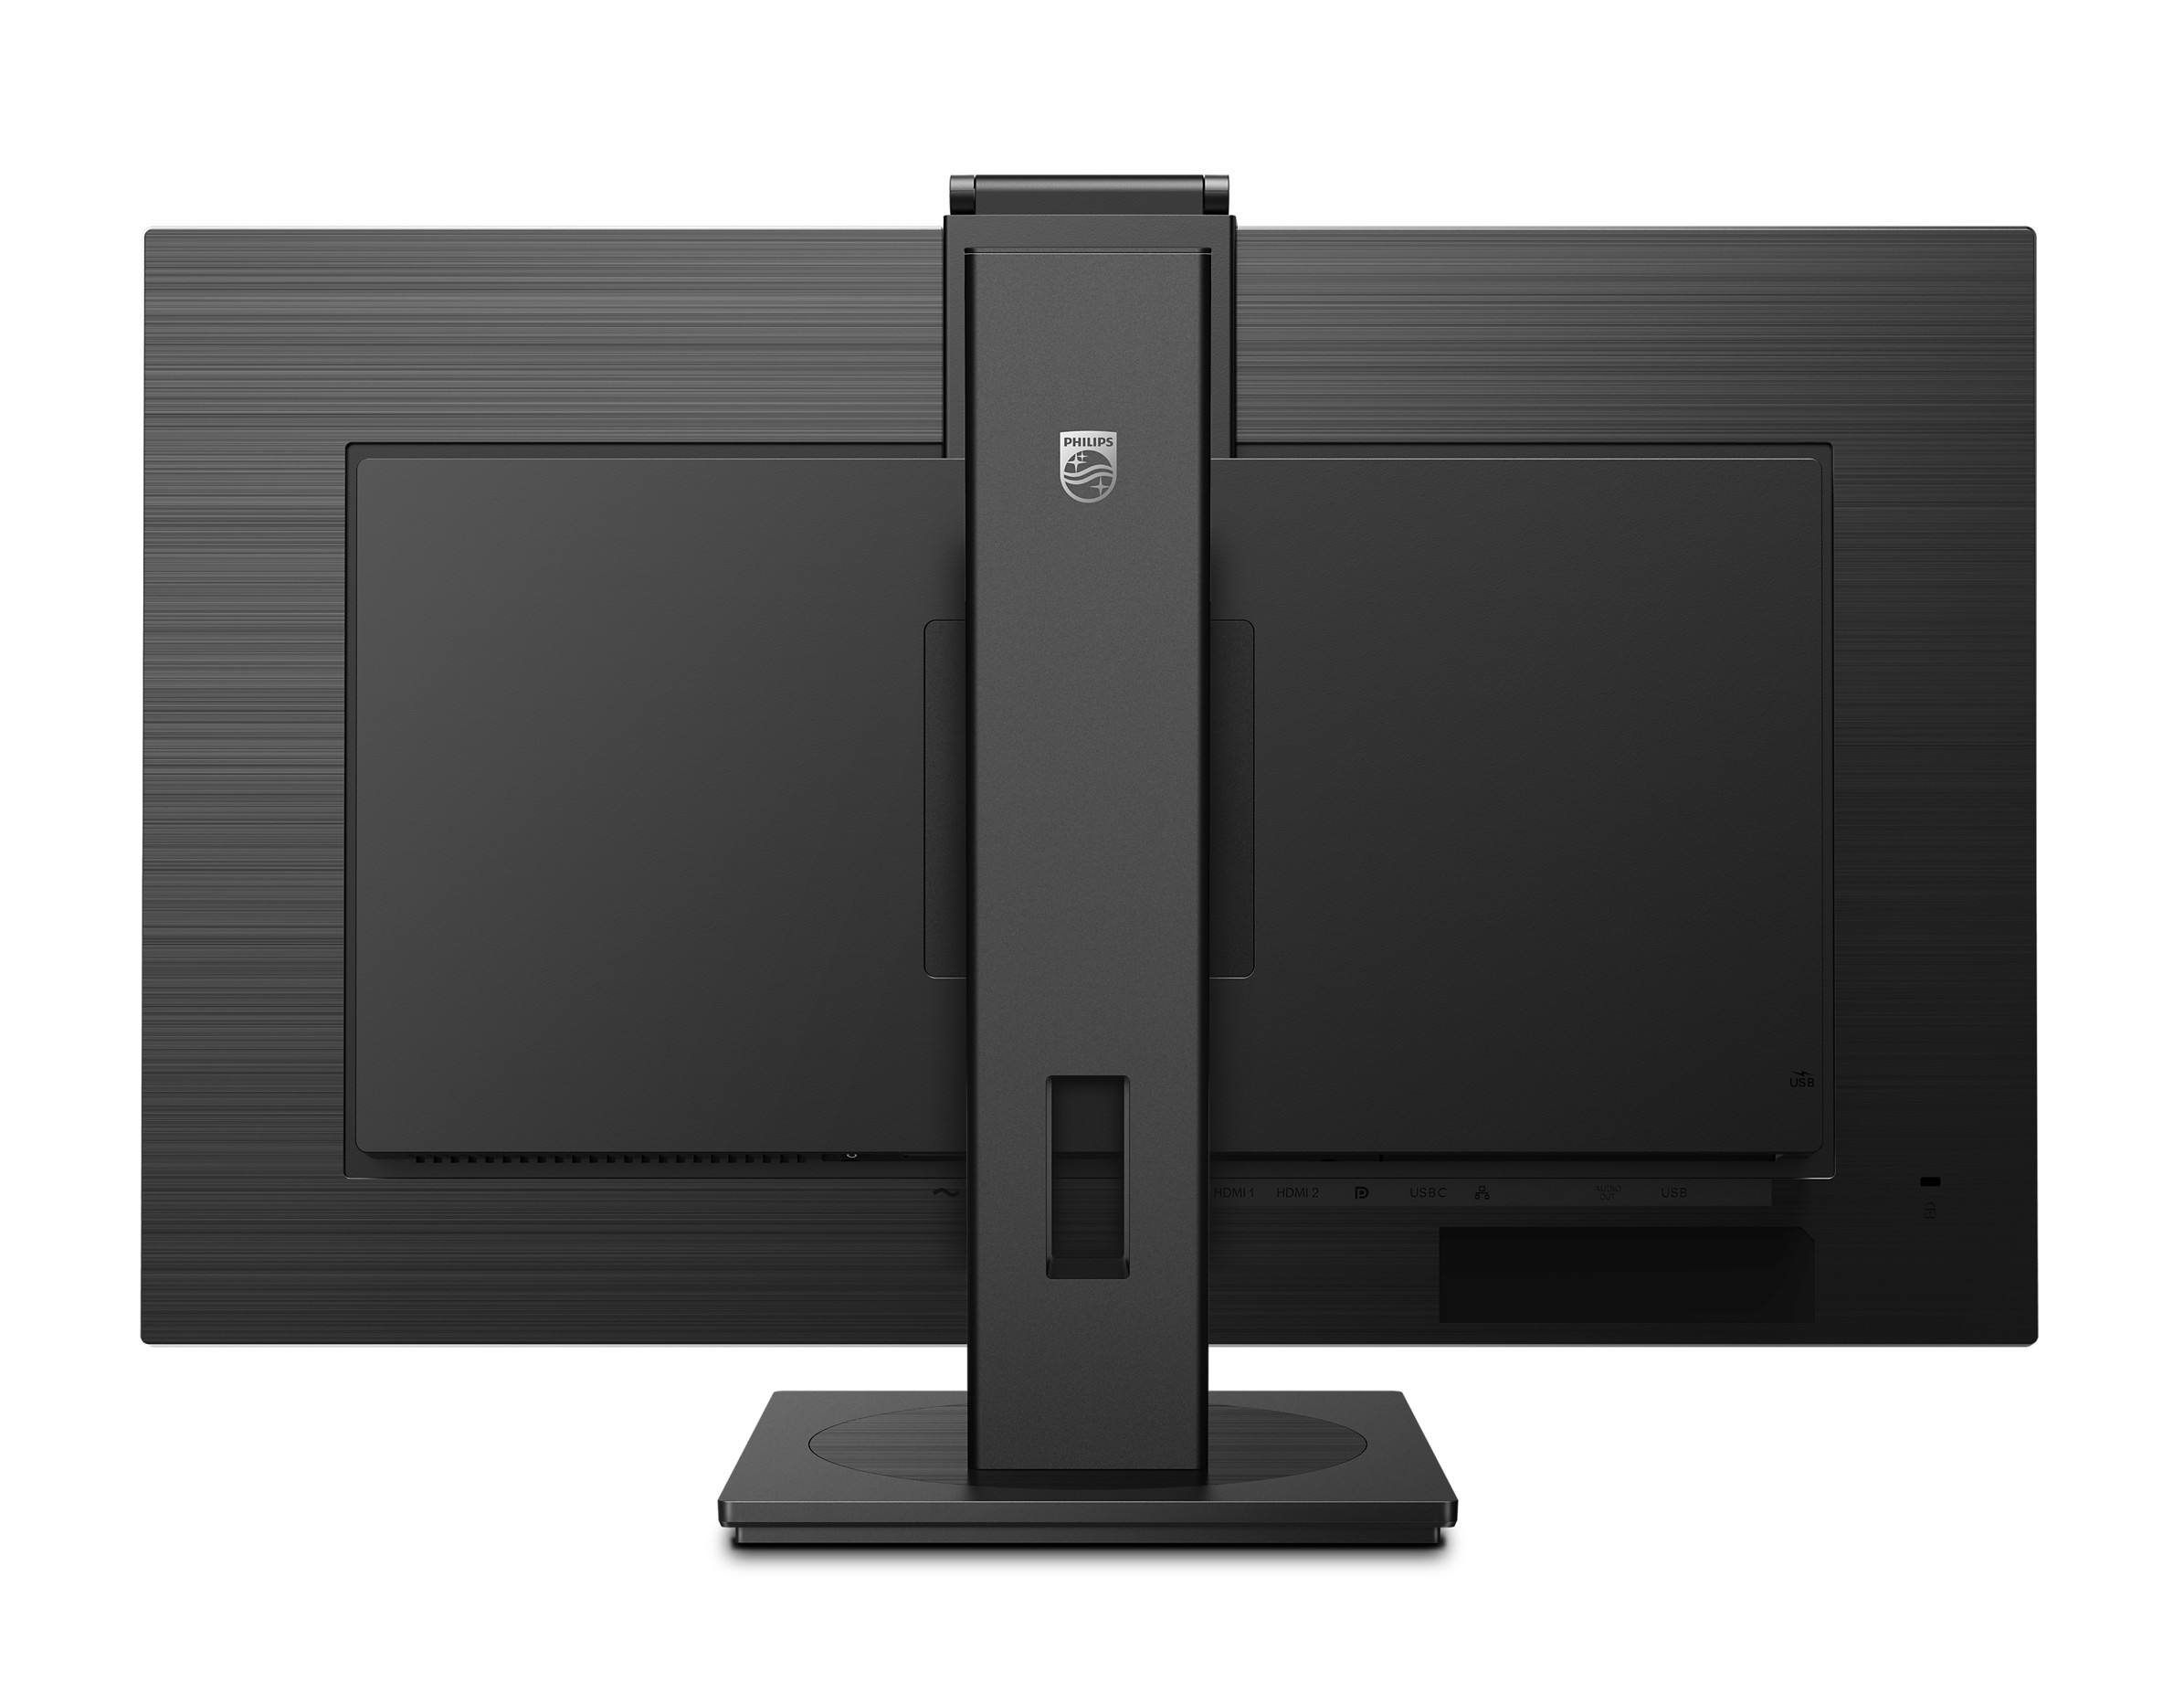 Philips Introduces Two Monitors with USB-C Docking Station and Windows  Hello Webcam